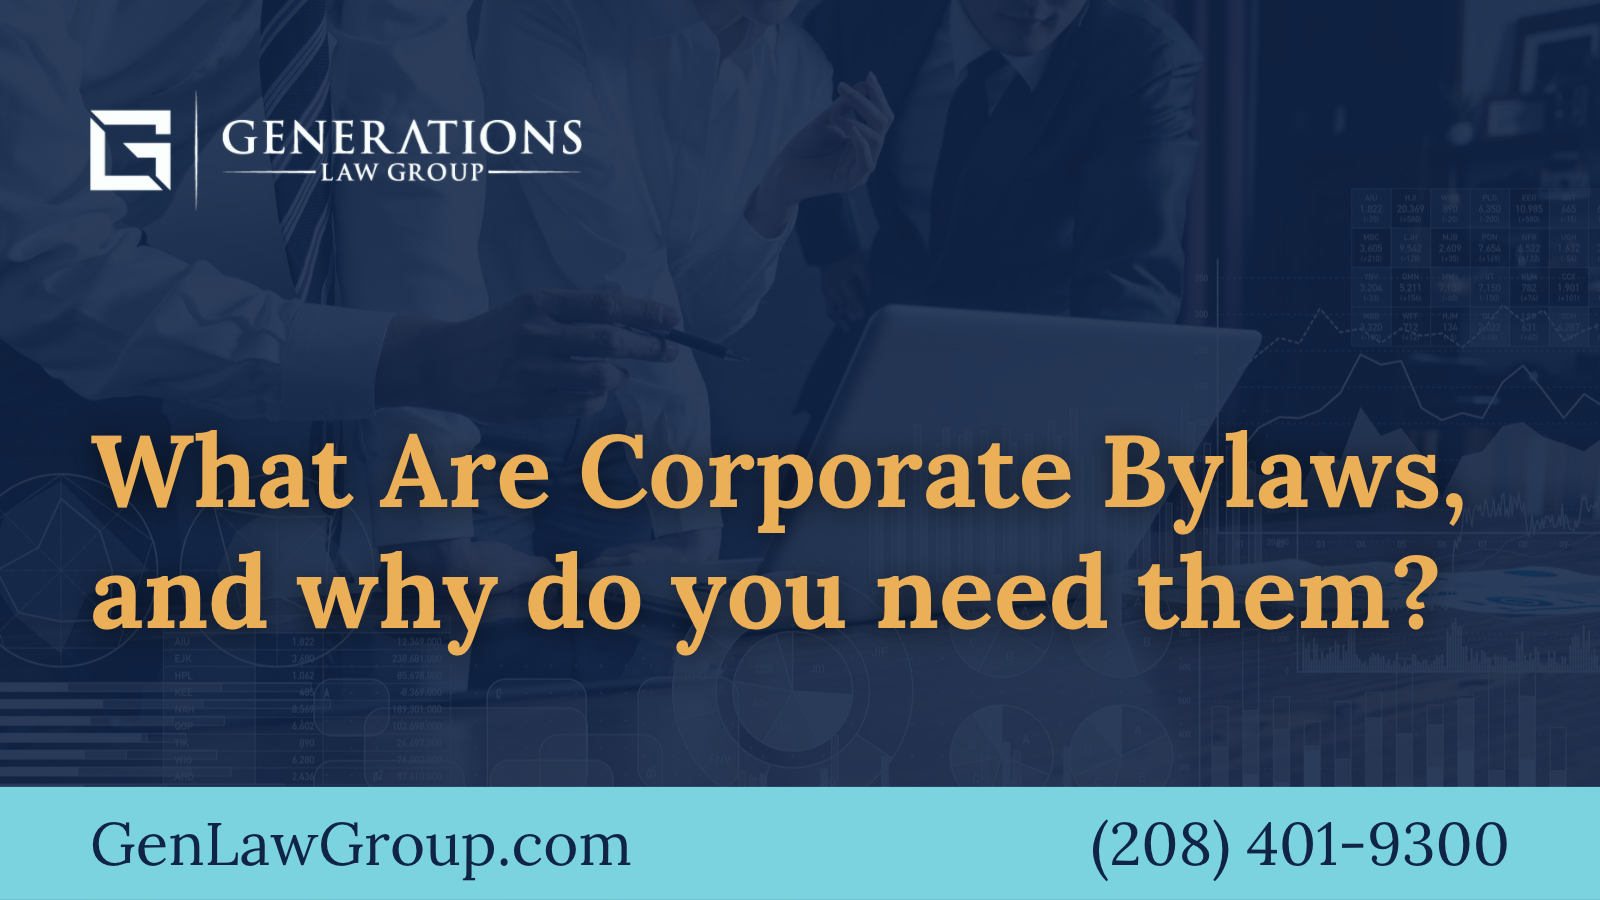 What Are Corporate Bylaws, and why do you need them?